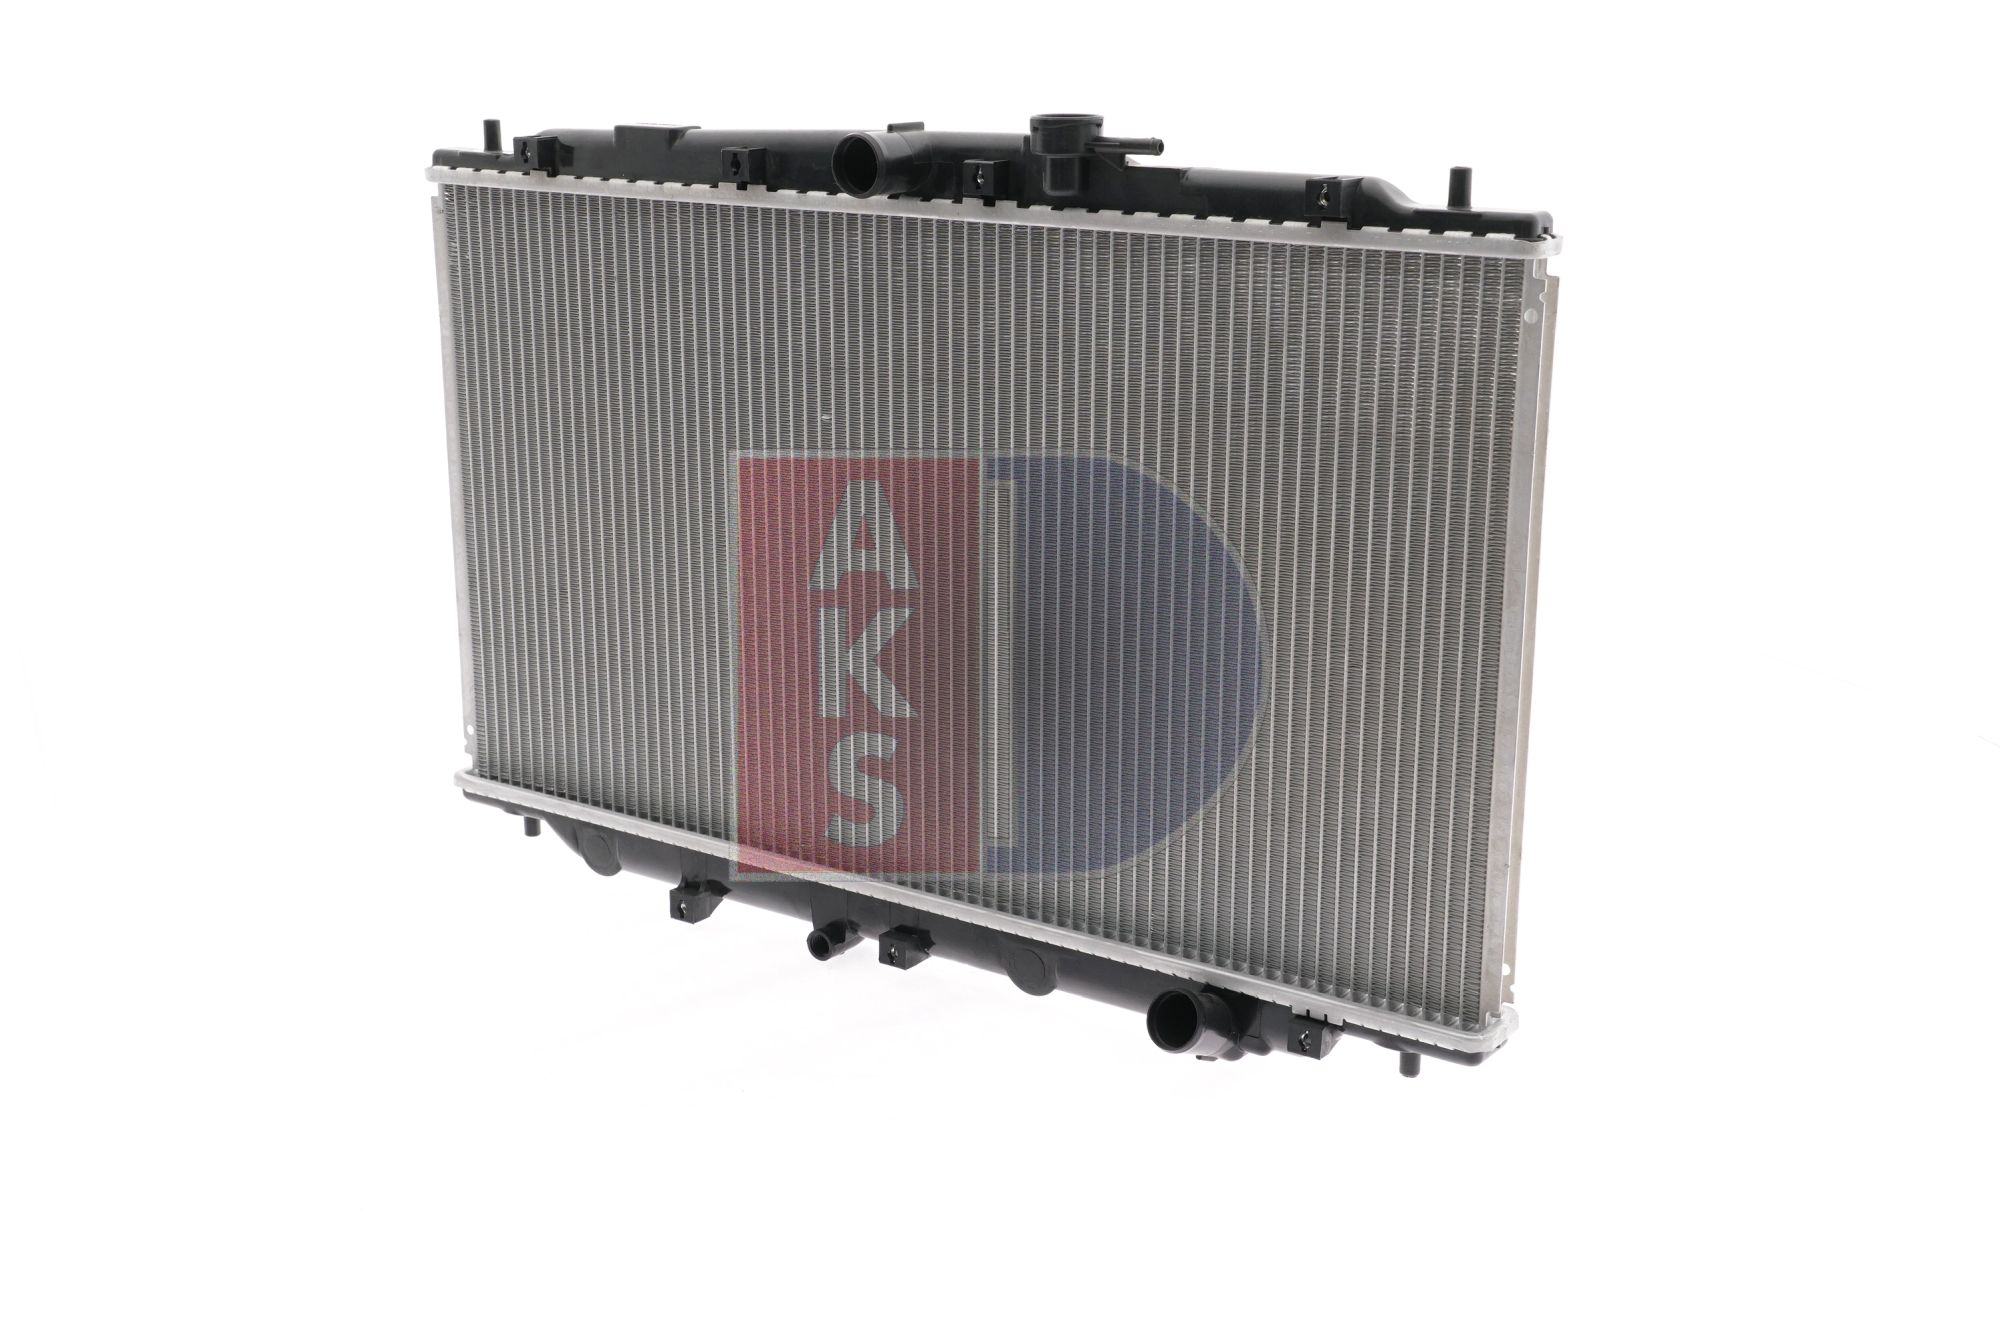 AKS DASIS 375 x 702 x 16 mm, without lid, Brazed cooling fins Radiator 100530N buy